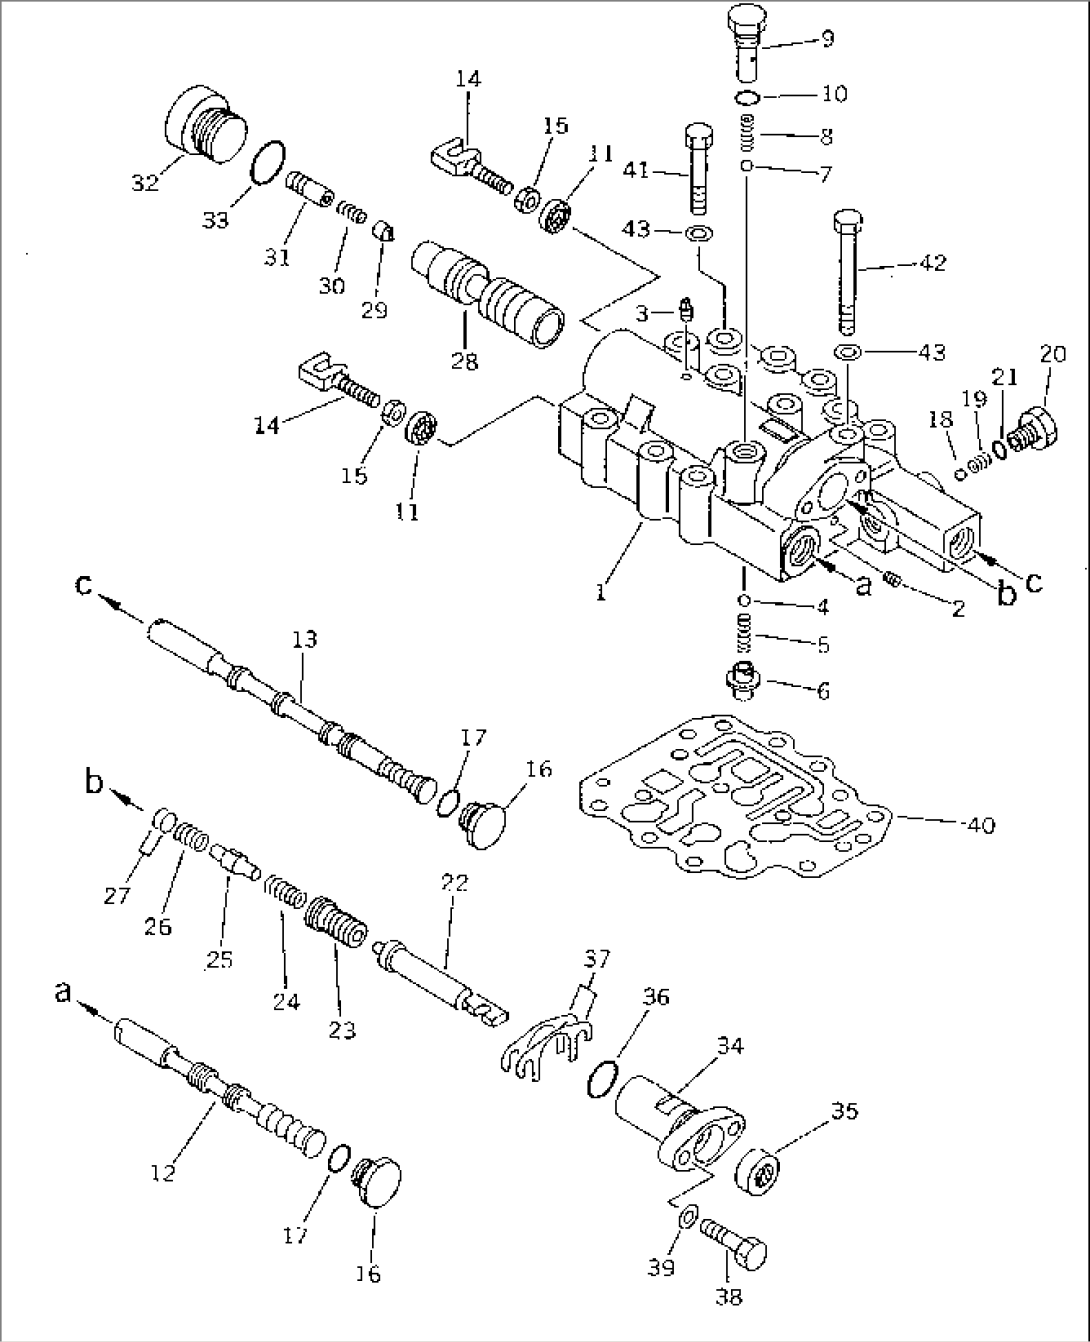 TRANSMISSION VALVE (F3-R3) (SELECTOR AND INCHING)